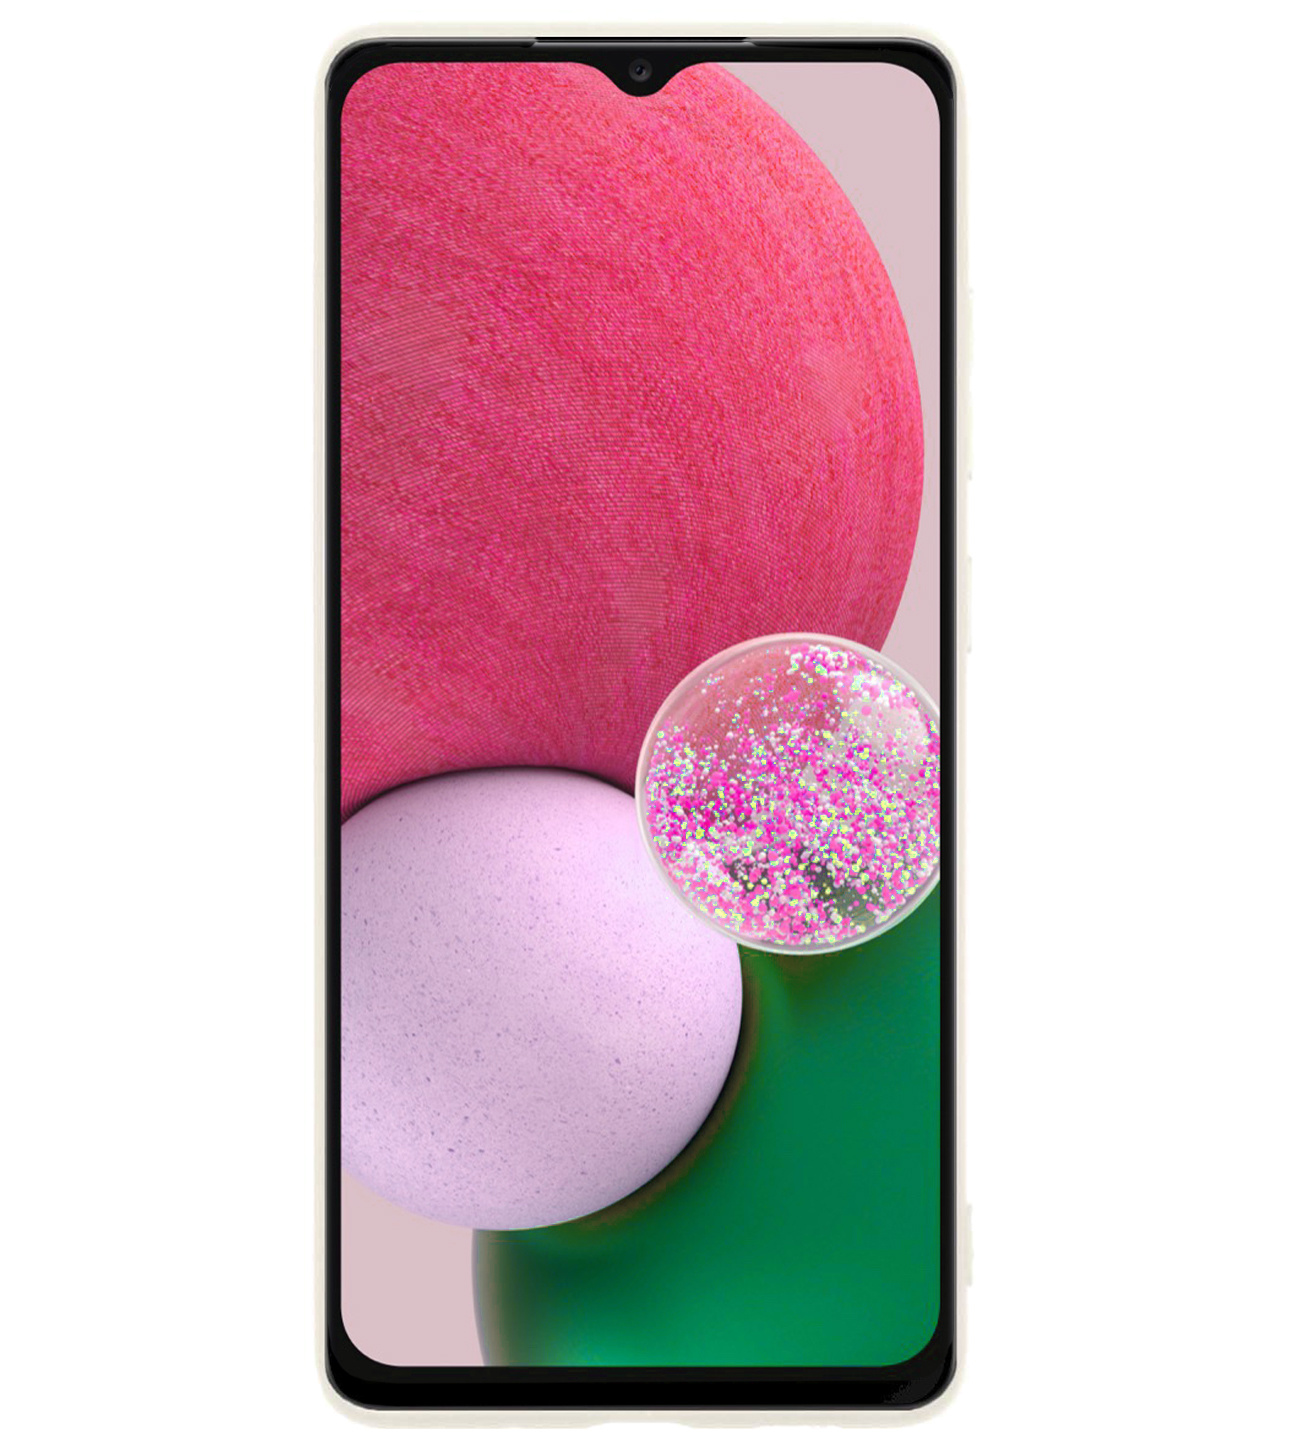 Hoes Geschikt voor Samsung A13 4G Hoesje Siliconen Back Cover Case - Hoesje Geschikt voor Samsung Galaxy A13 4G Hoes Cover Hoesje - Wit